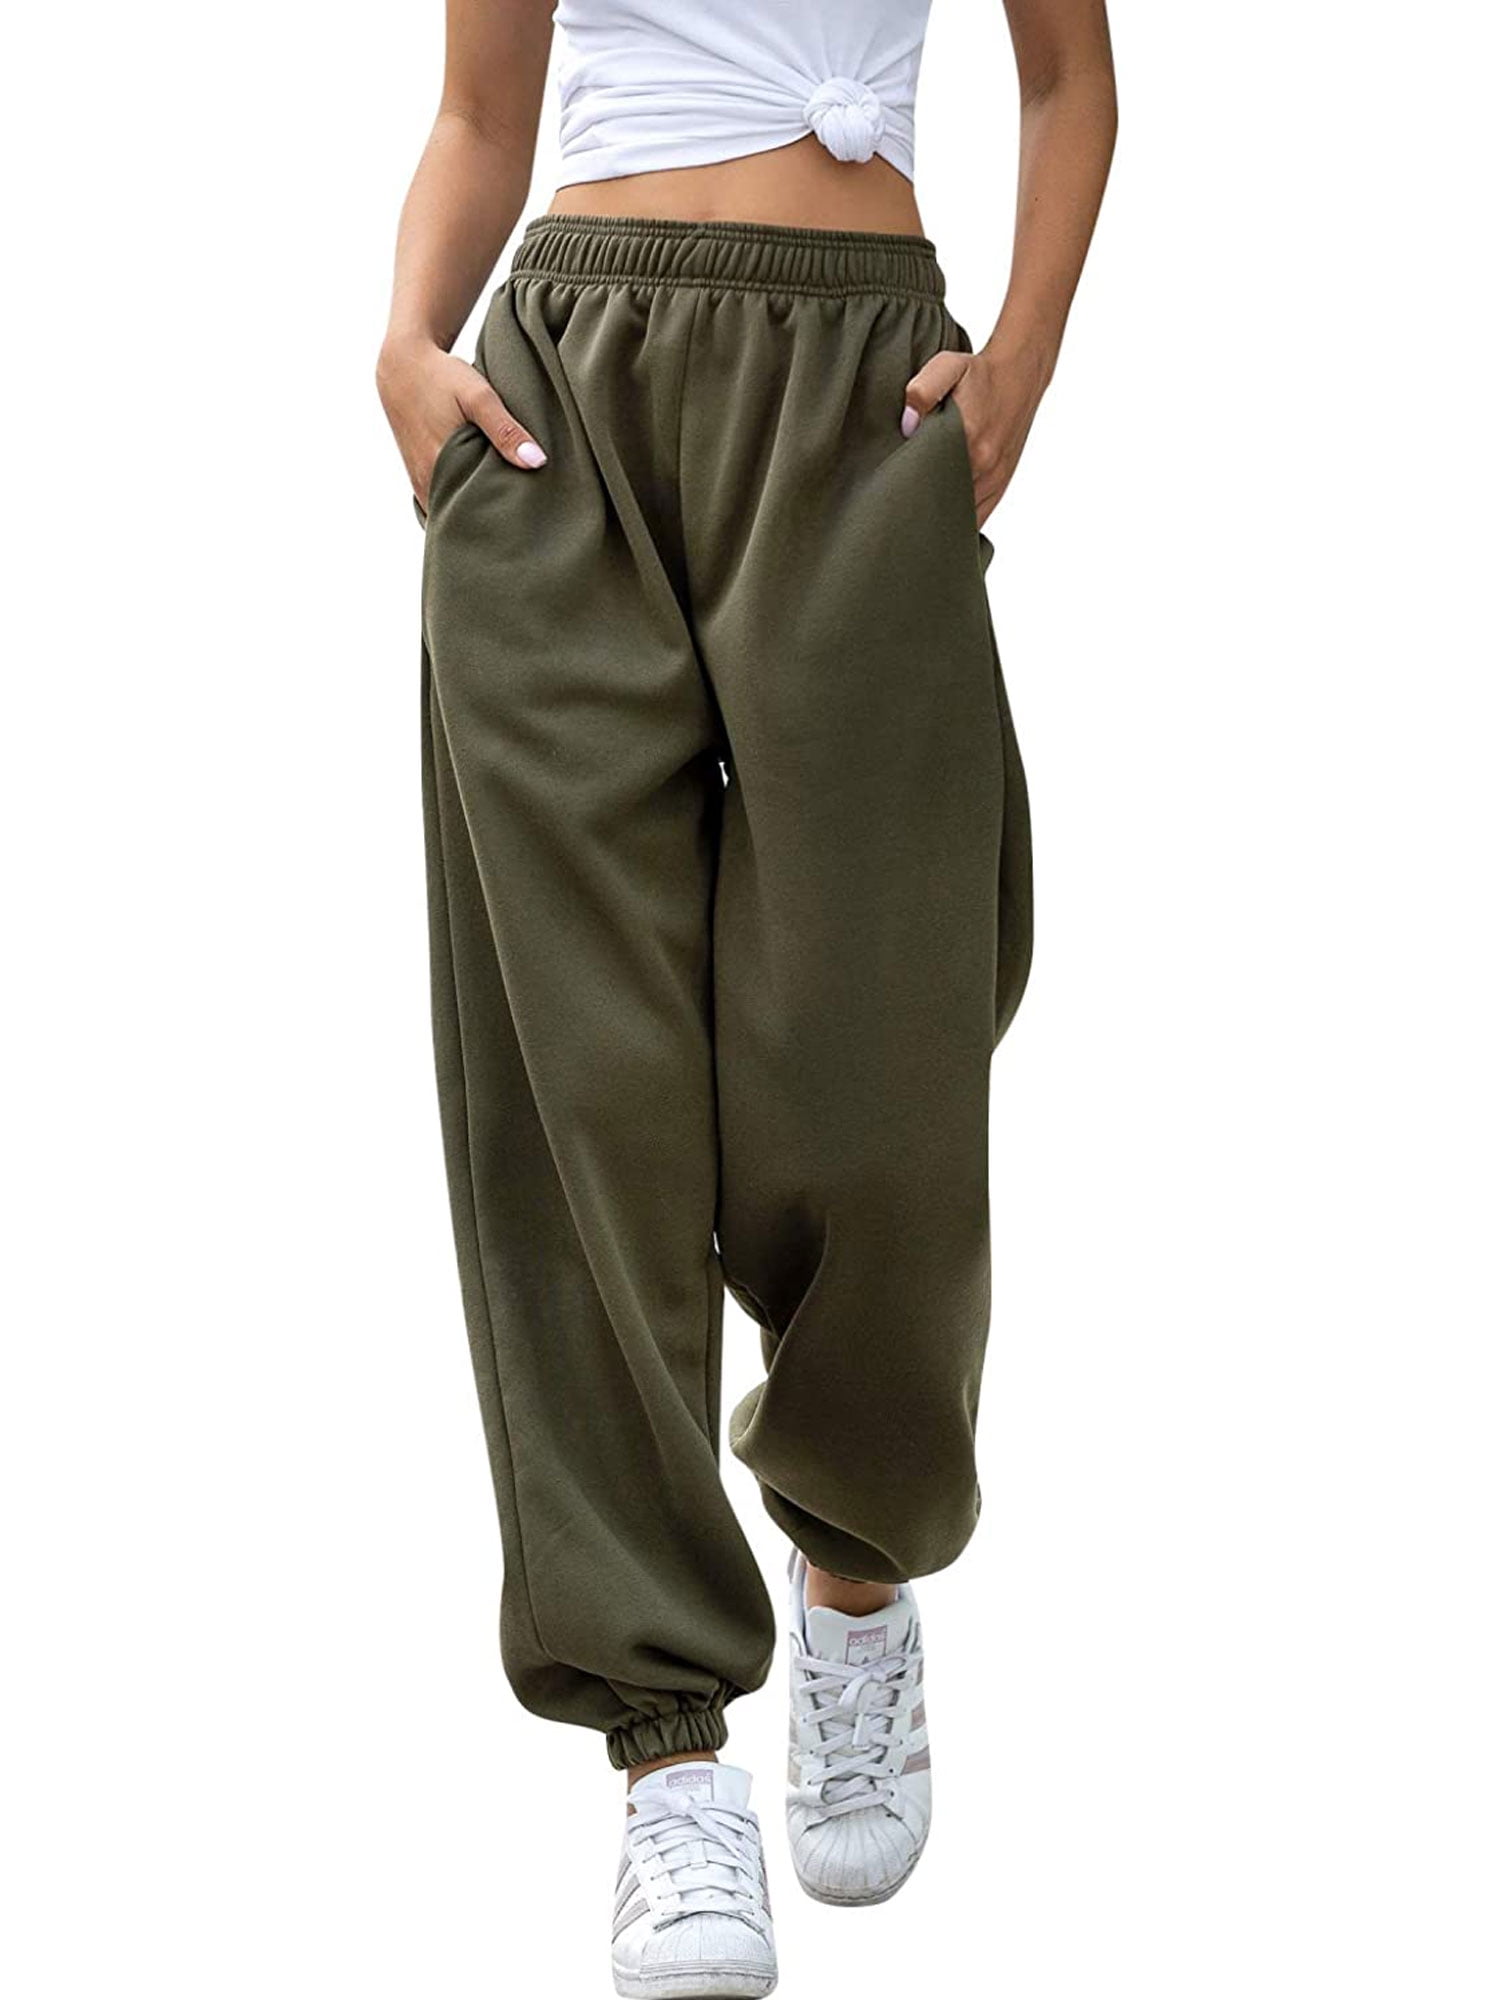  HYUIYYEAA Women's Thin High Waisted Loose Sweatpants  Comfortable Jogging Pants Side Pockets Casual Sweatpants Plus Size Trouser  (Beige, S) : Clothing, Shoes & Jewelry